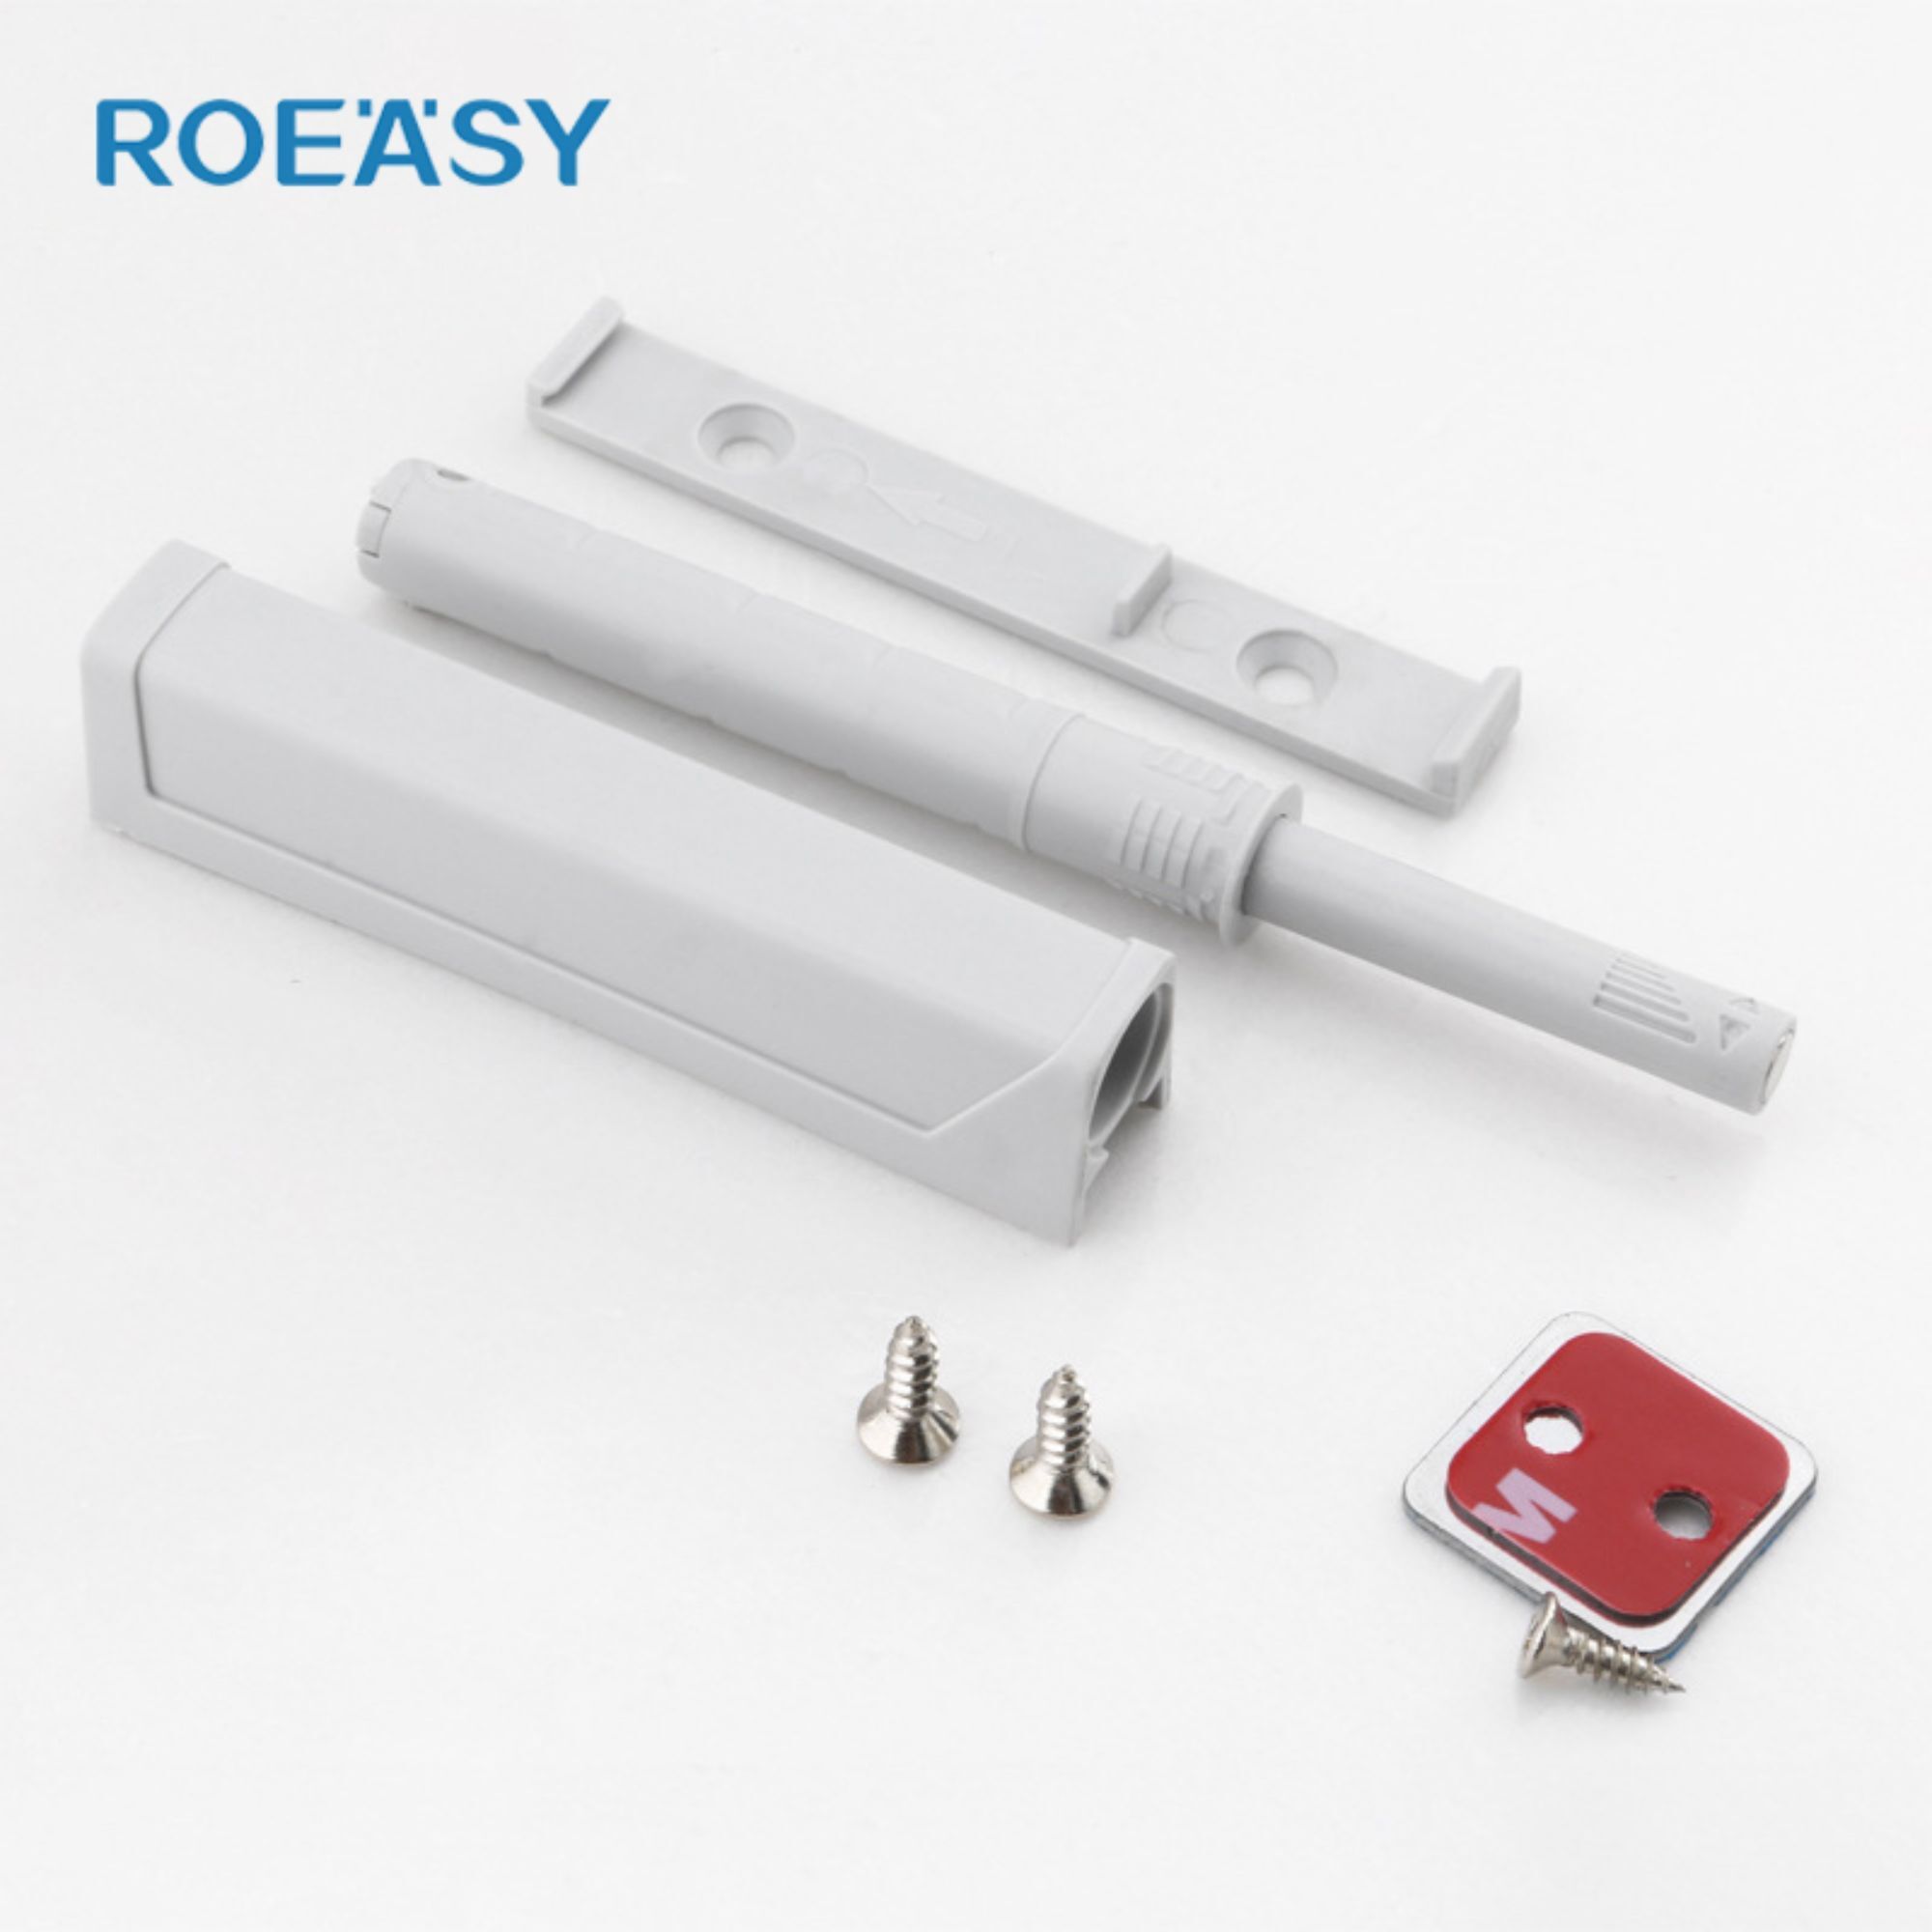 Roeasy RT021A Magnetic Catcher Push to Open Cabinet Door Latches